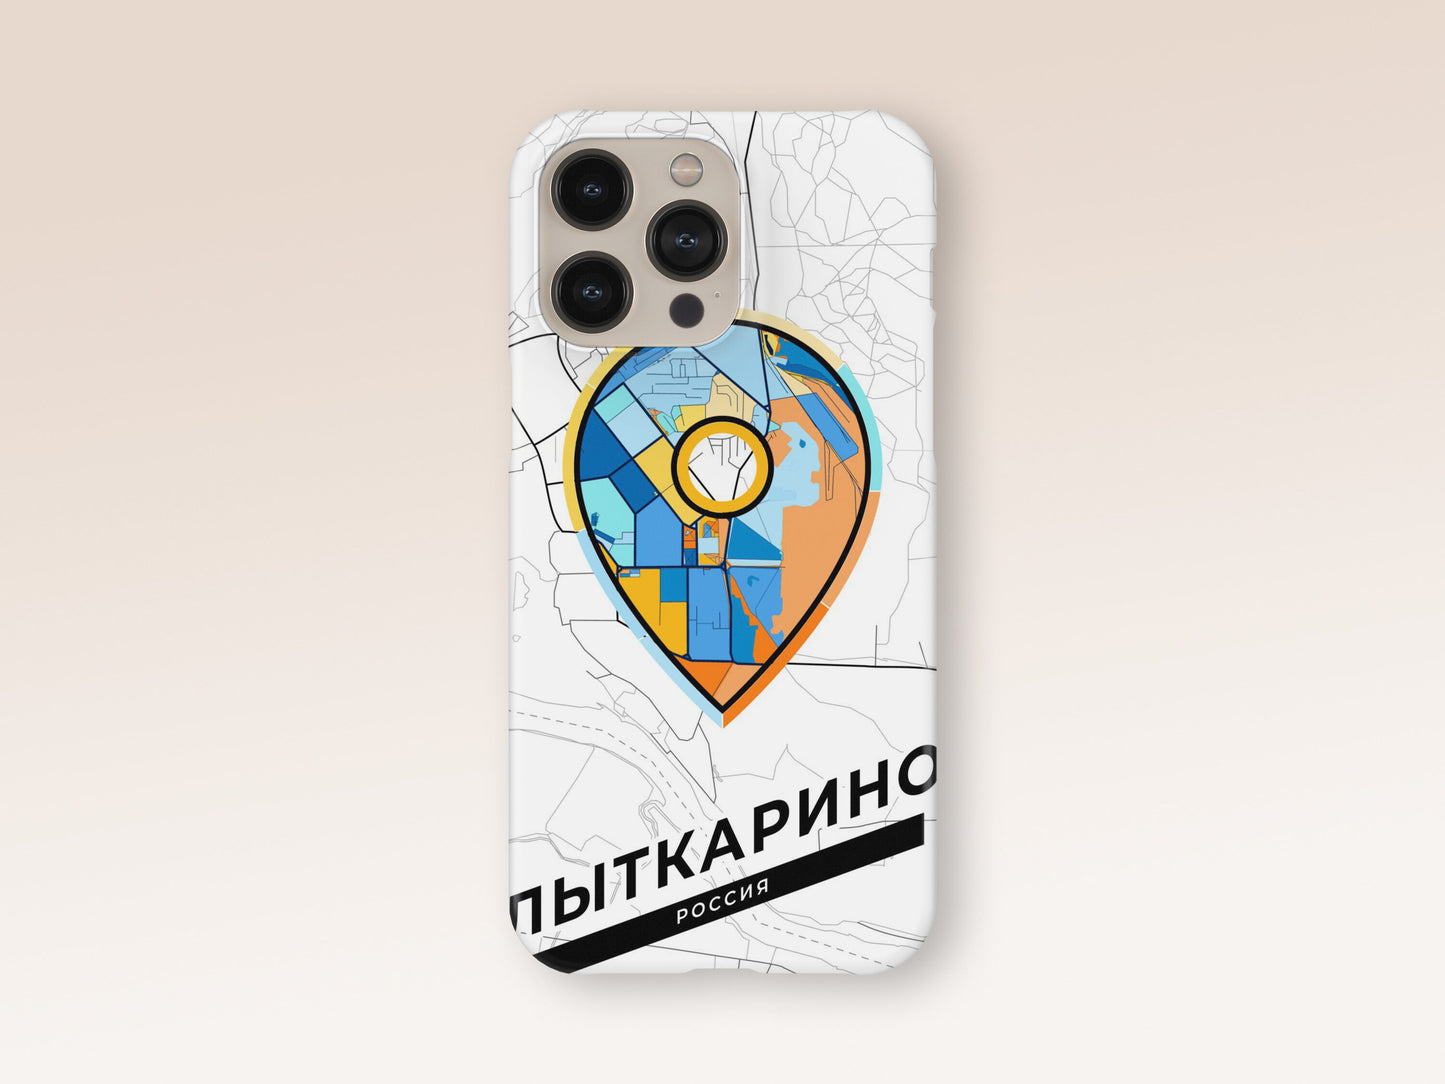 Lytkarino Russia slim phone case with colorful icon. Birthday, wedding or housewarming gift. Couple match cases. 1